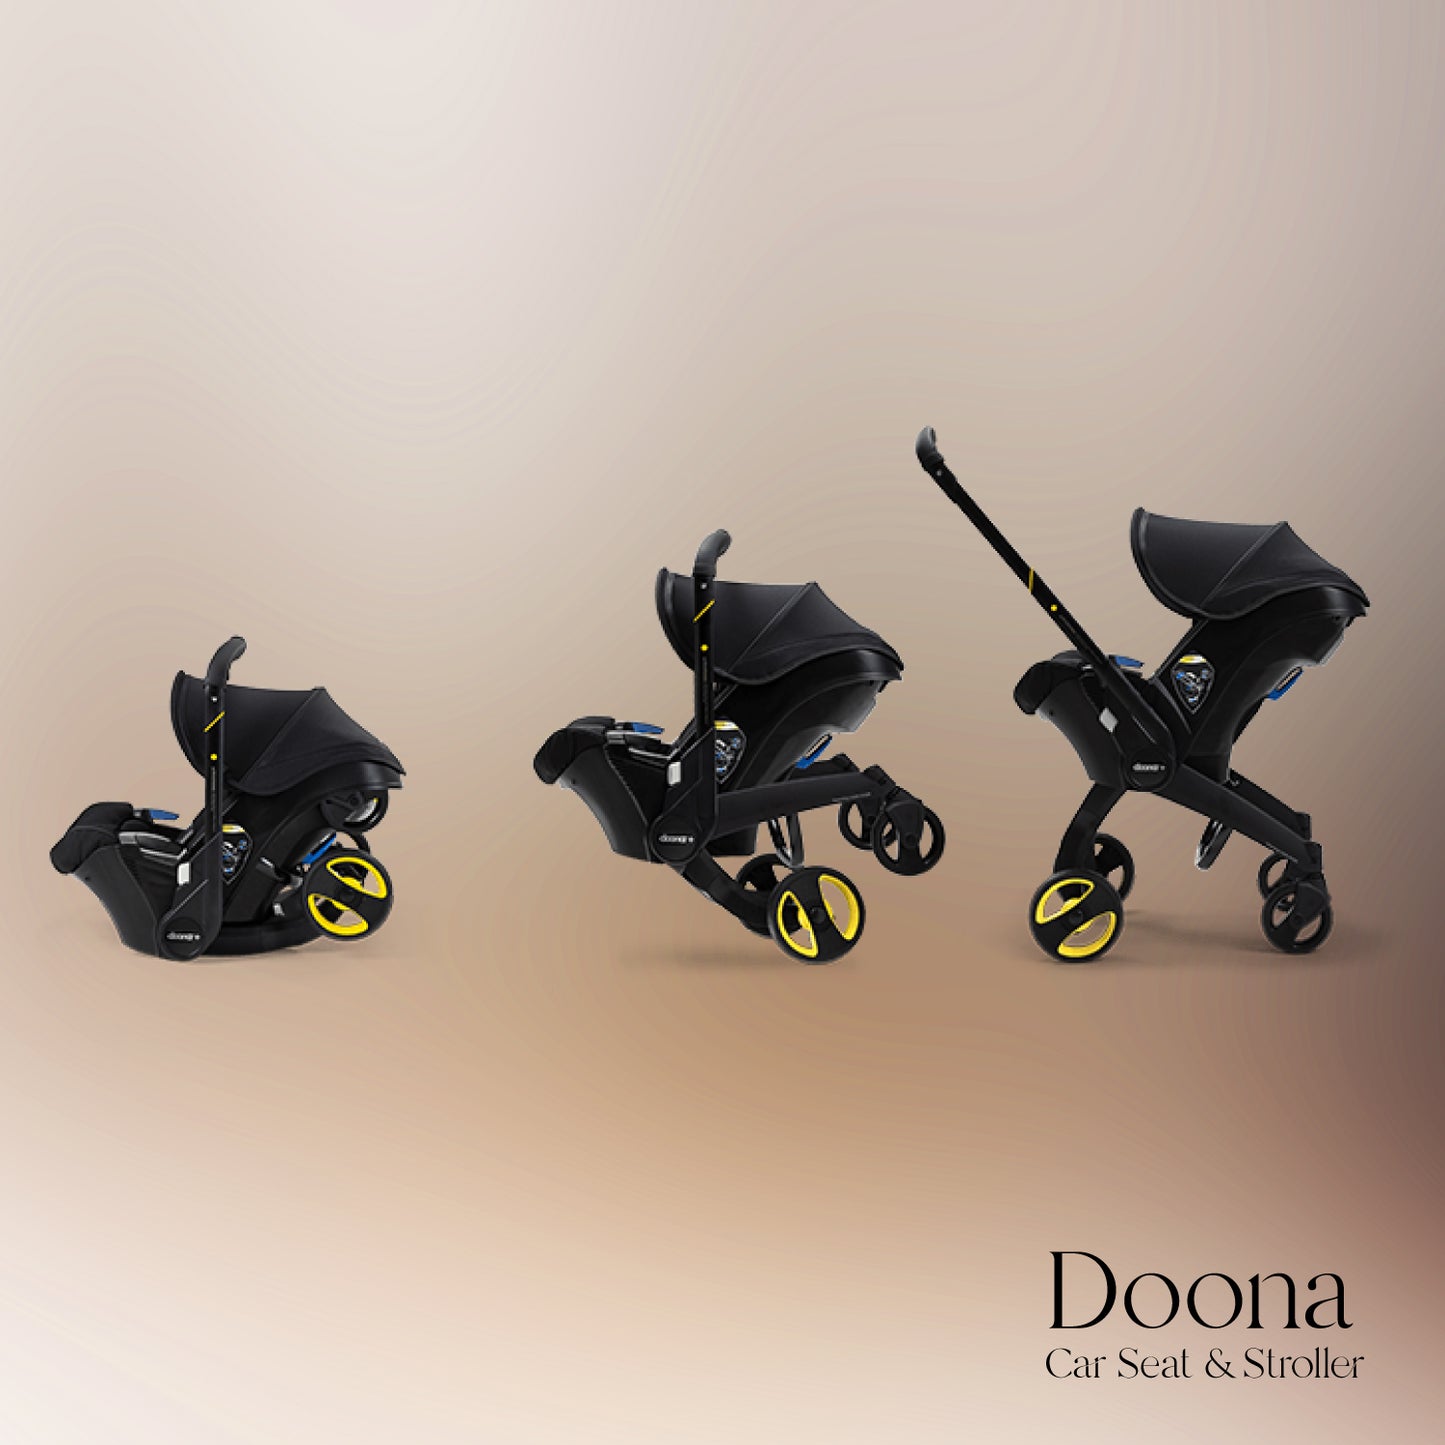 Ultimate All-in-One Doona Car Seat & Stroller in Nitro Black with convertible car seat and stroller, featuring ergonomic support, premium safety features, and an adjustable handlebar for convenient and safe travel with your infant.